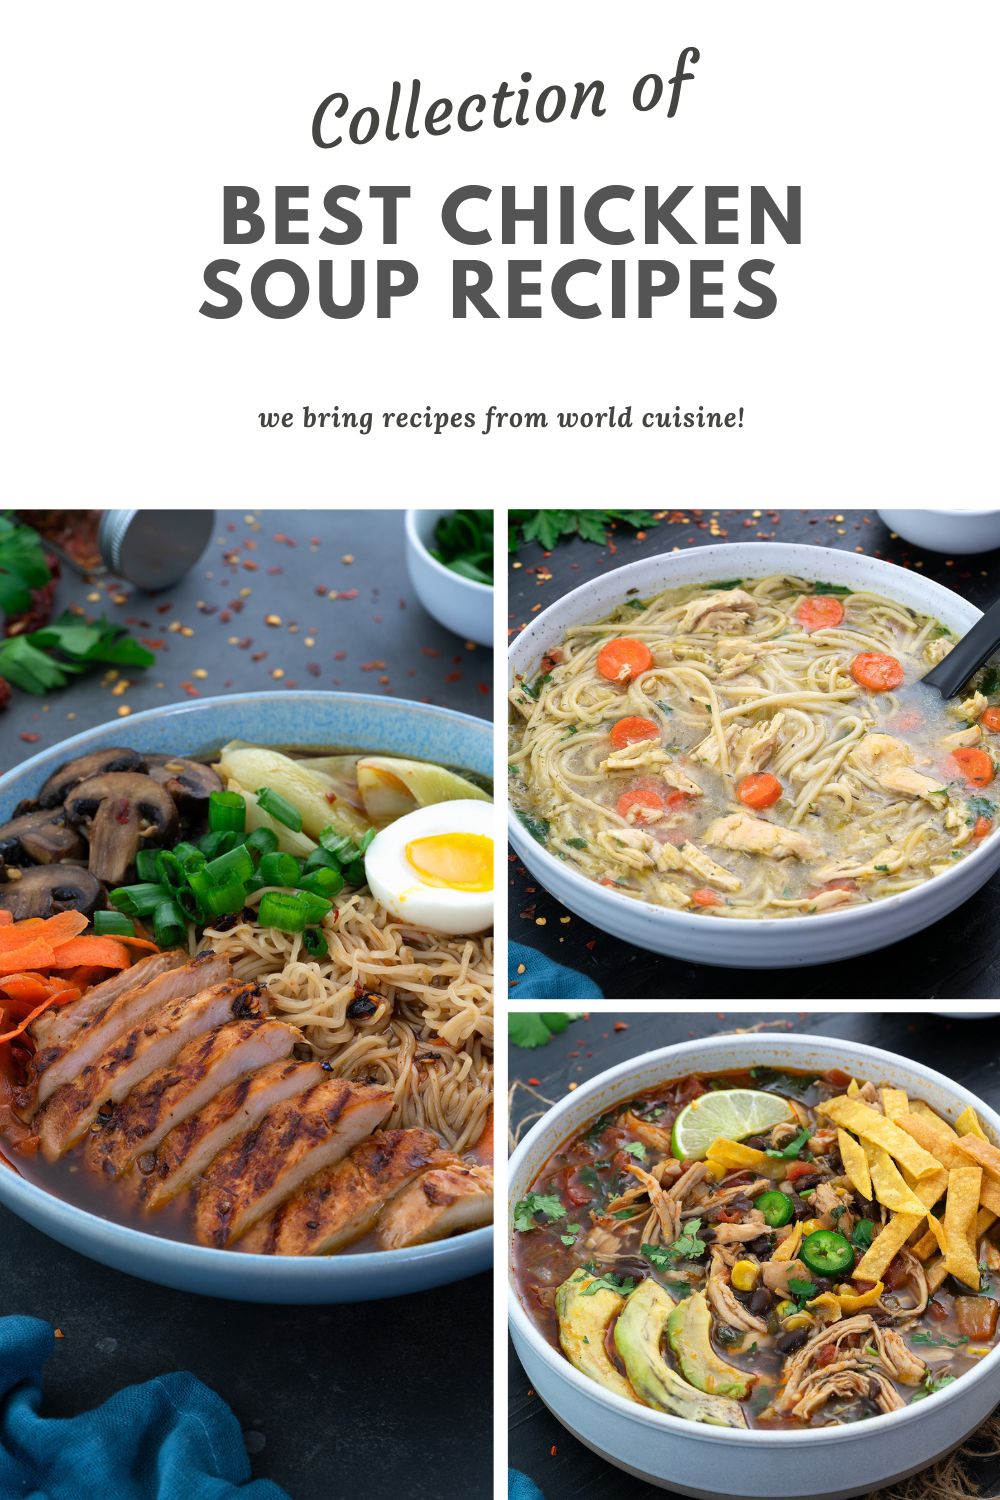 Collage of different soup recipes in different bowls.